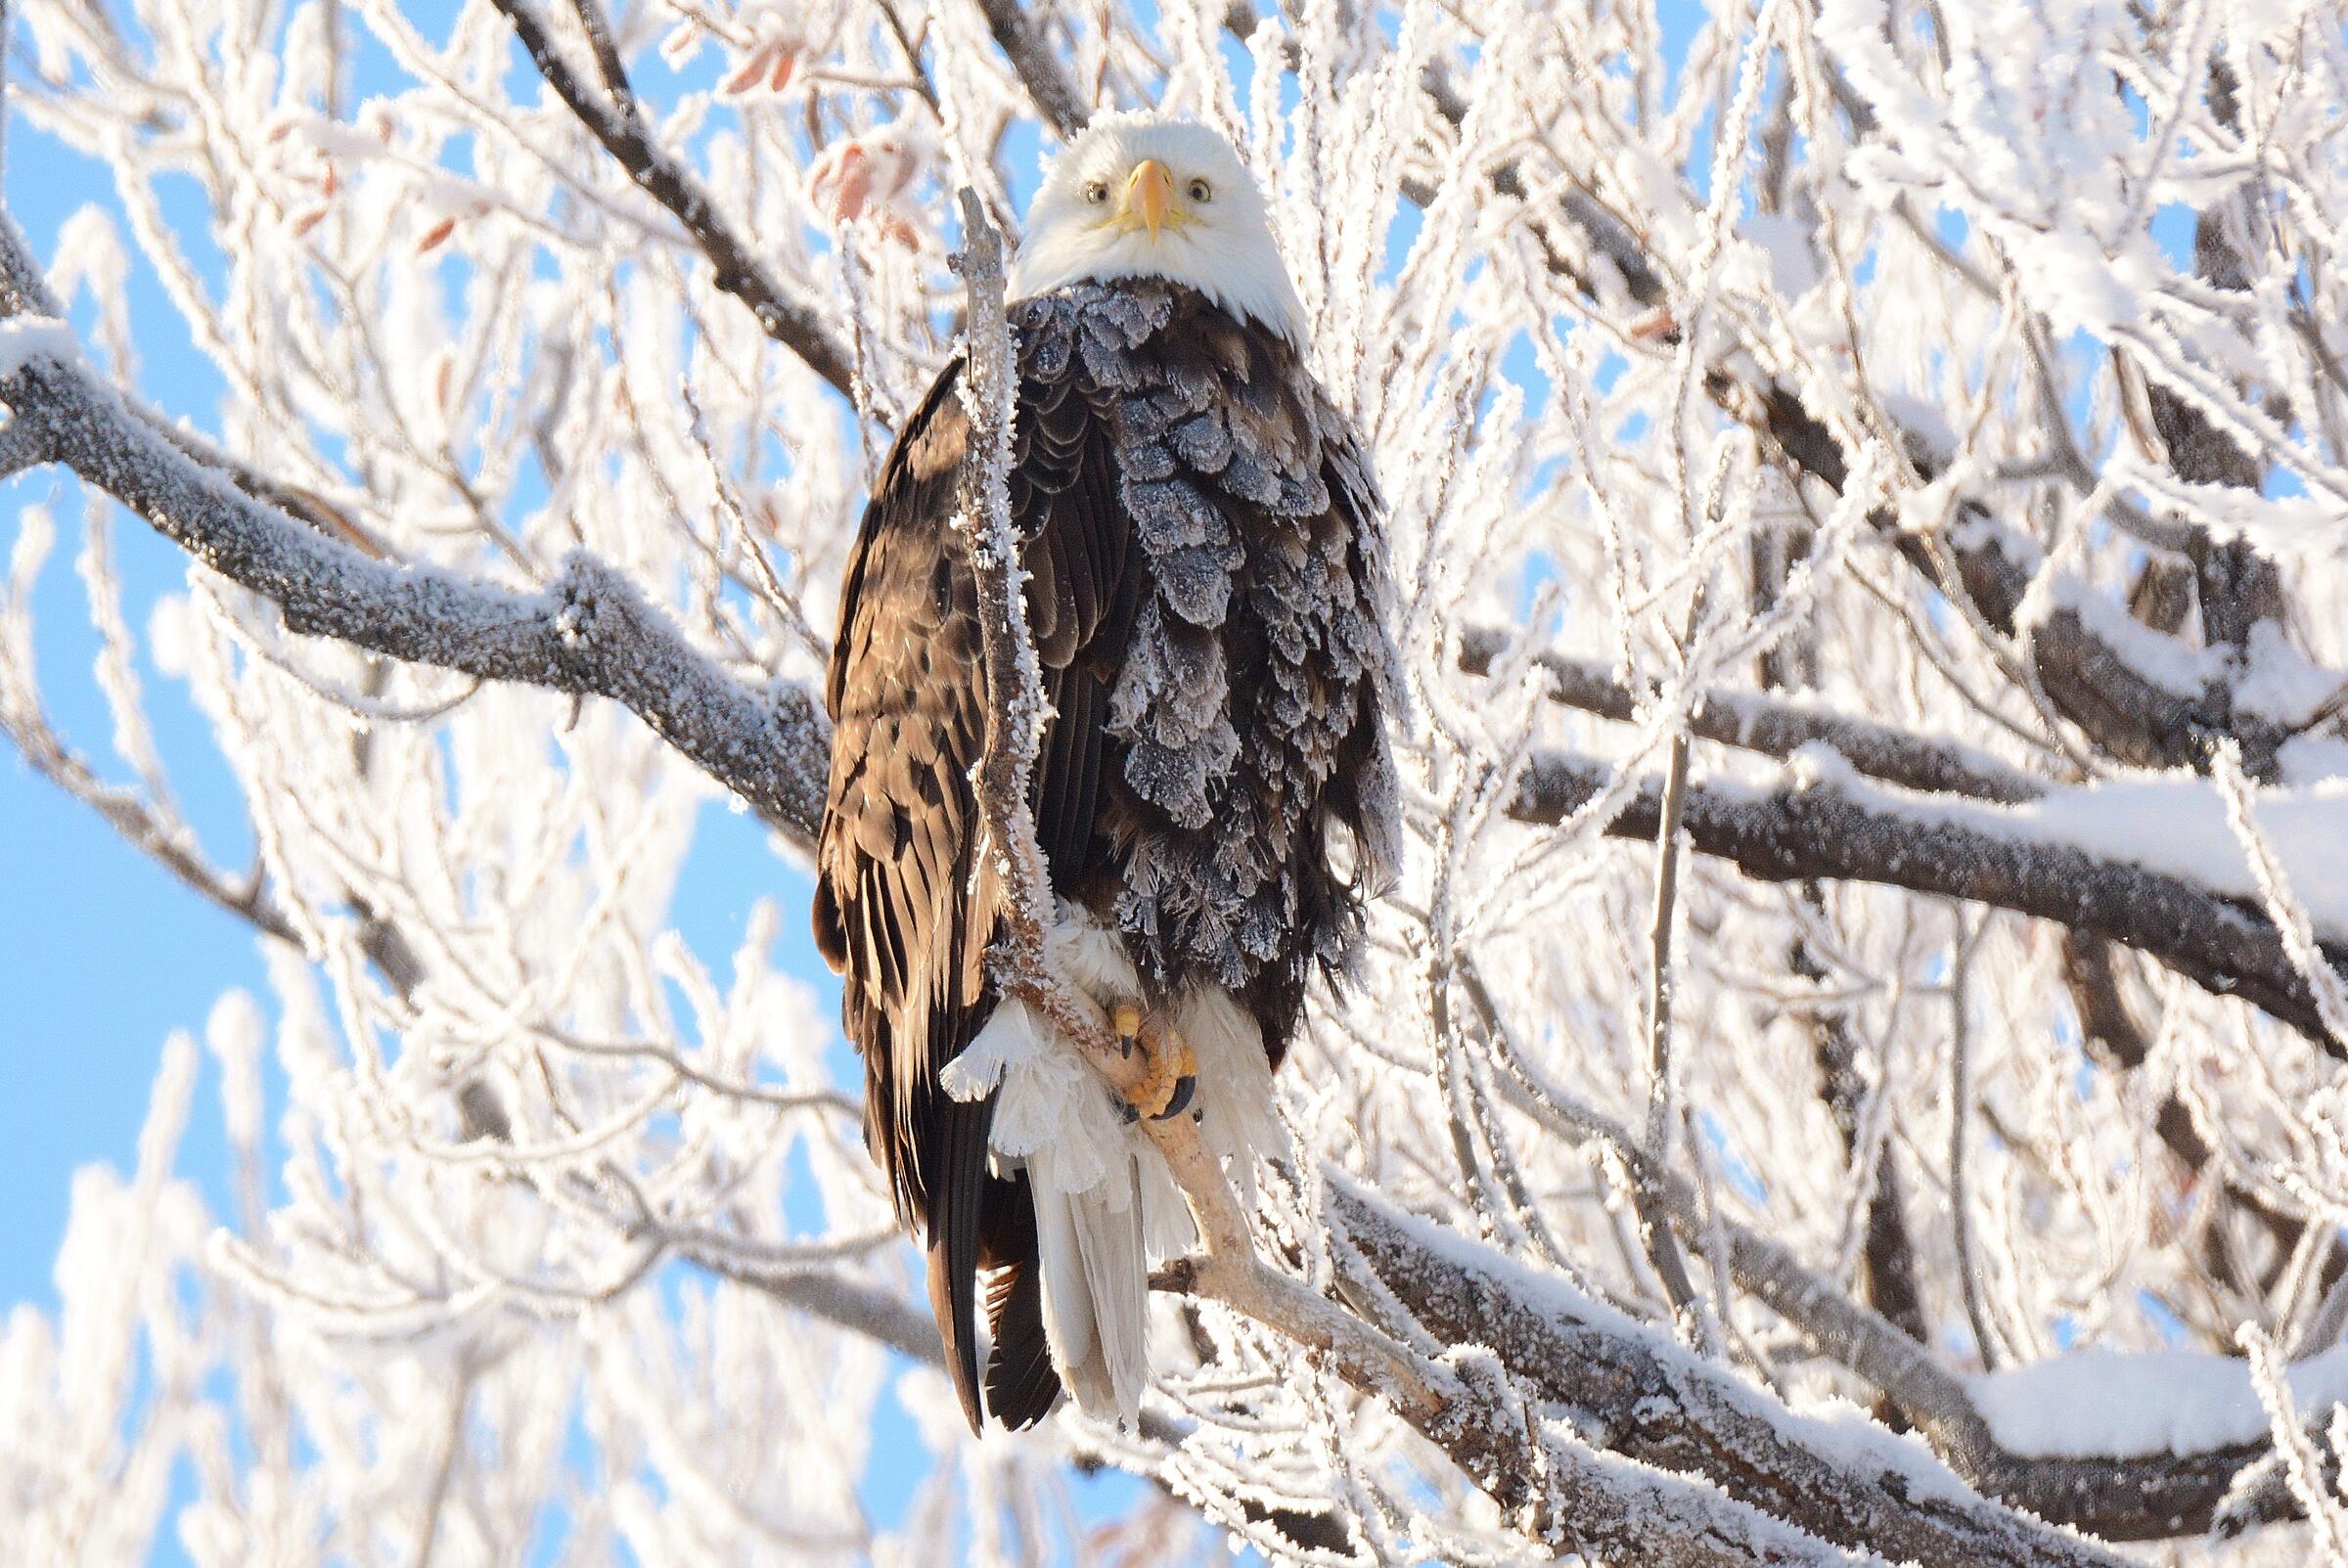 An adult Bald Eagle perches on a frost-covered branch. Ice and snow coat the tree branches in the background.